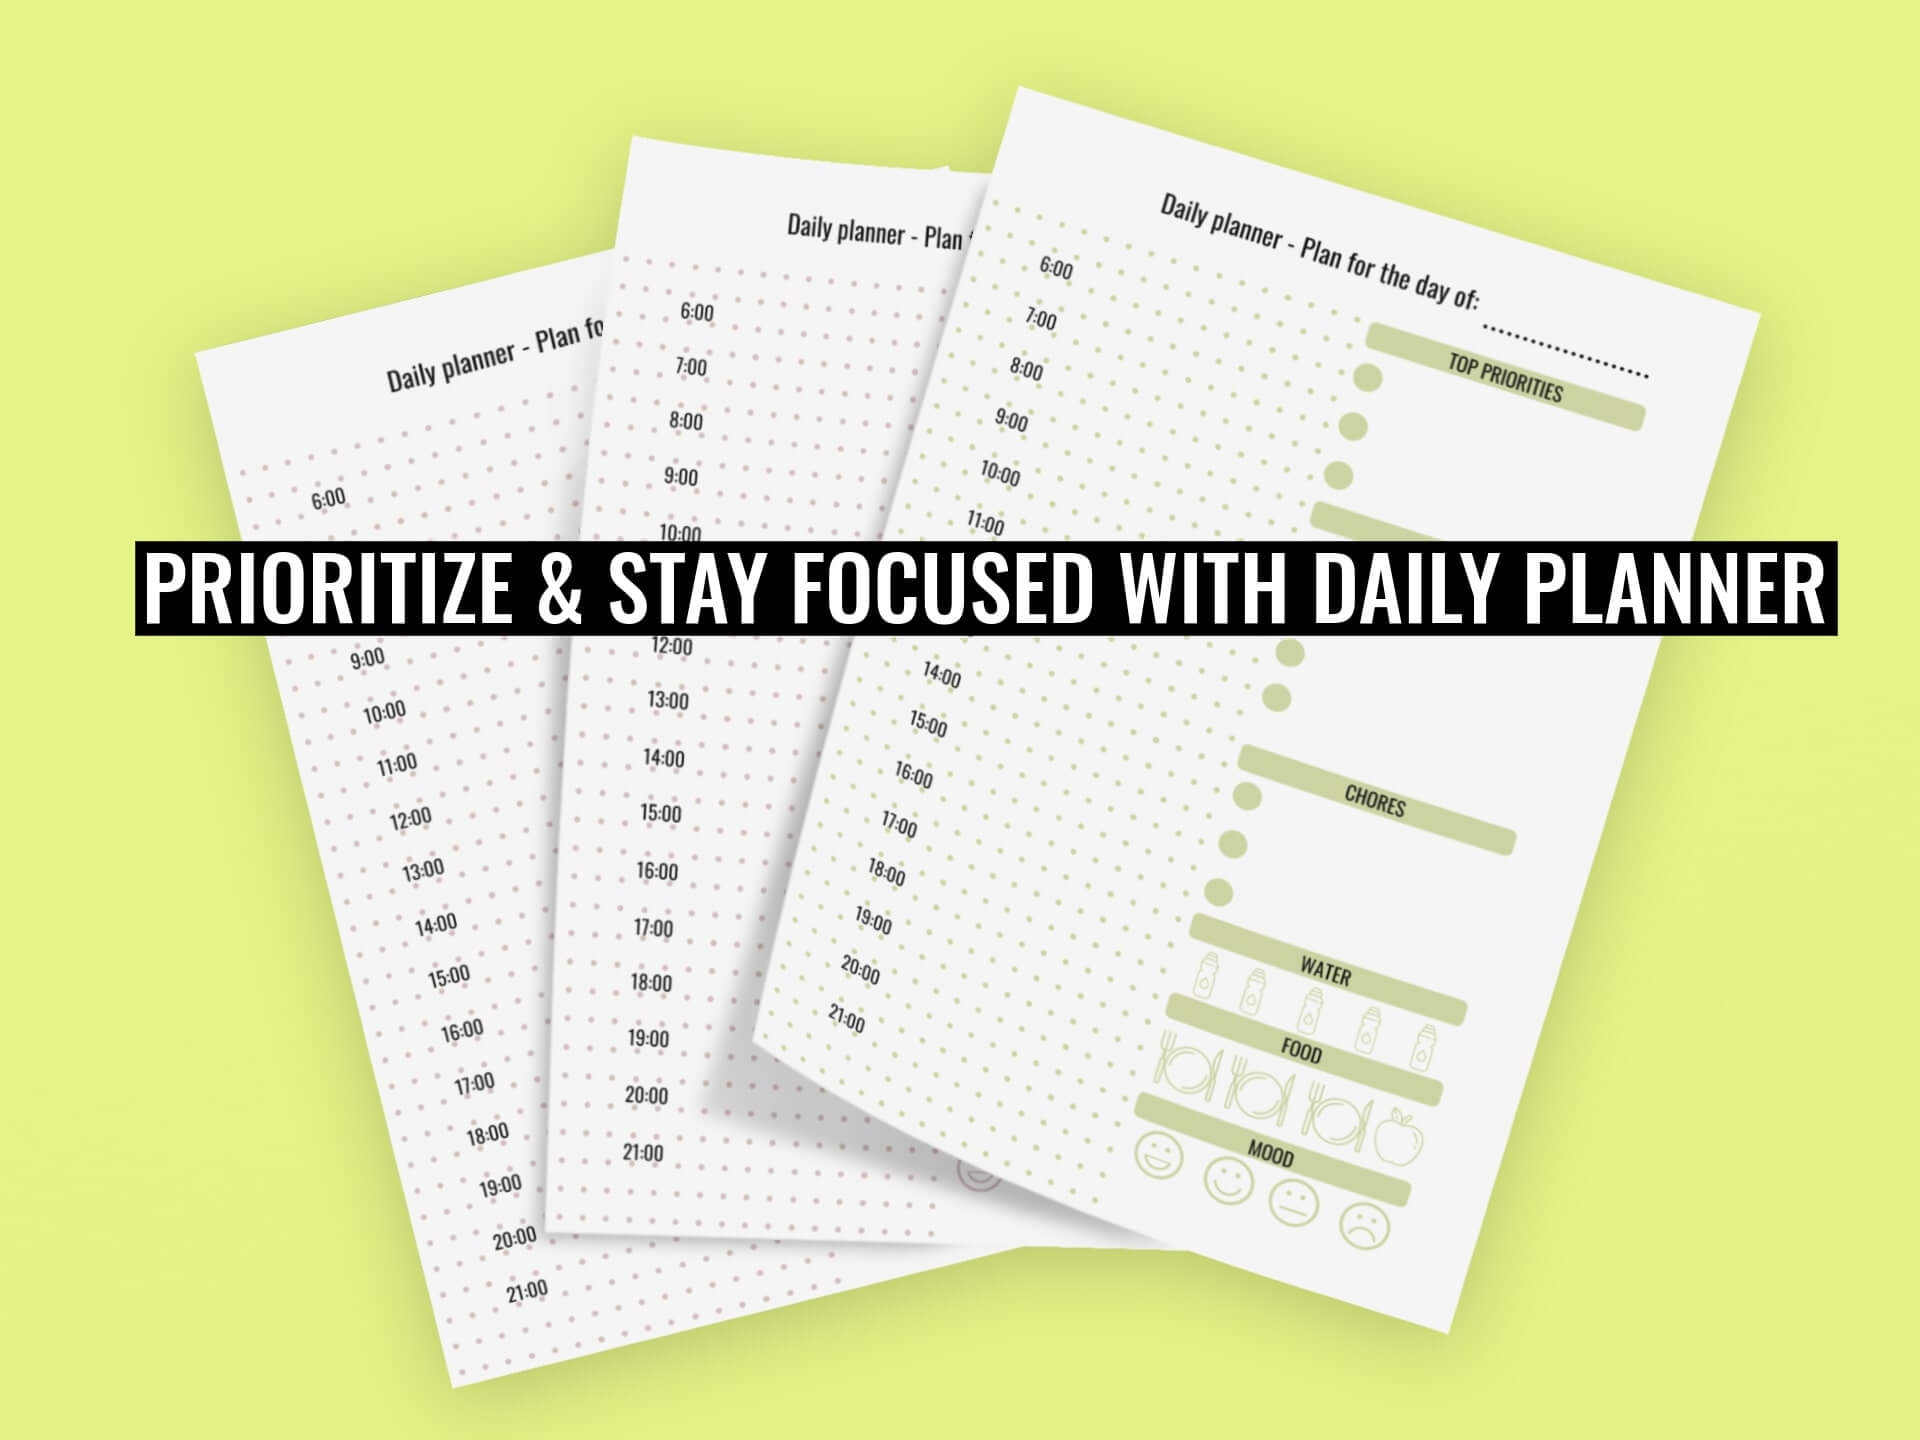 Prioritize and stay focused with daily planner and daily schedule